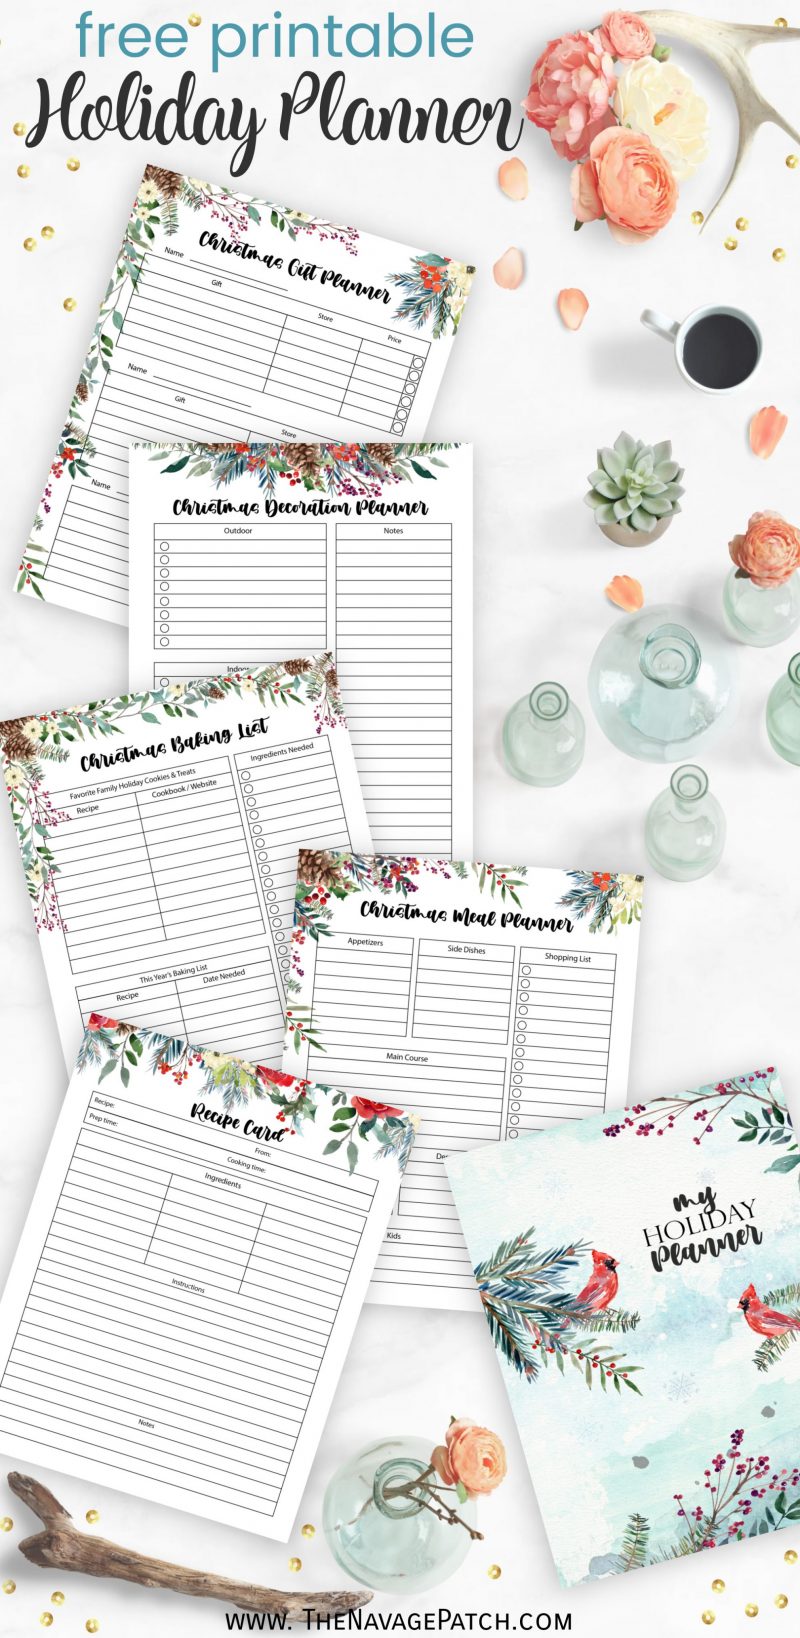 Free Printable Holiday Planner by TheNavagePatch.com